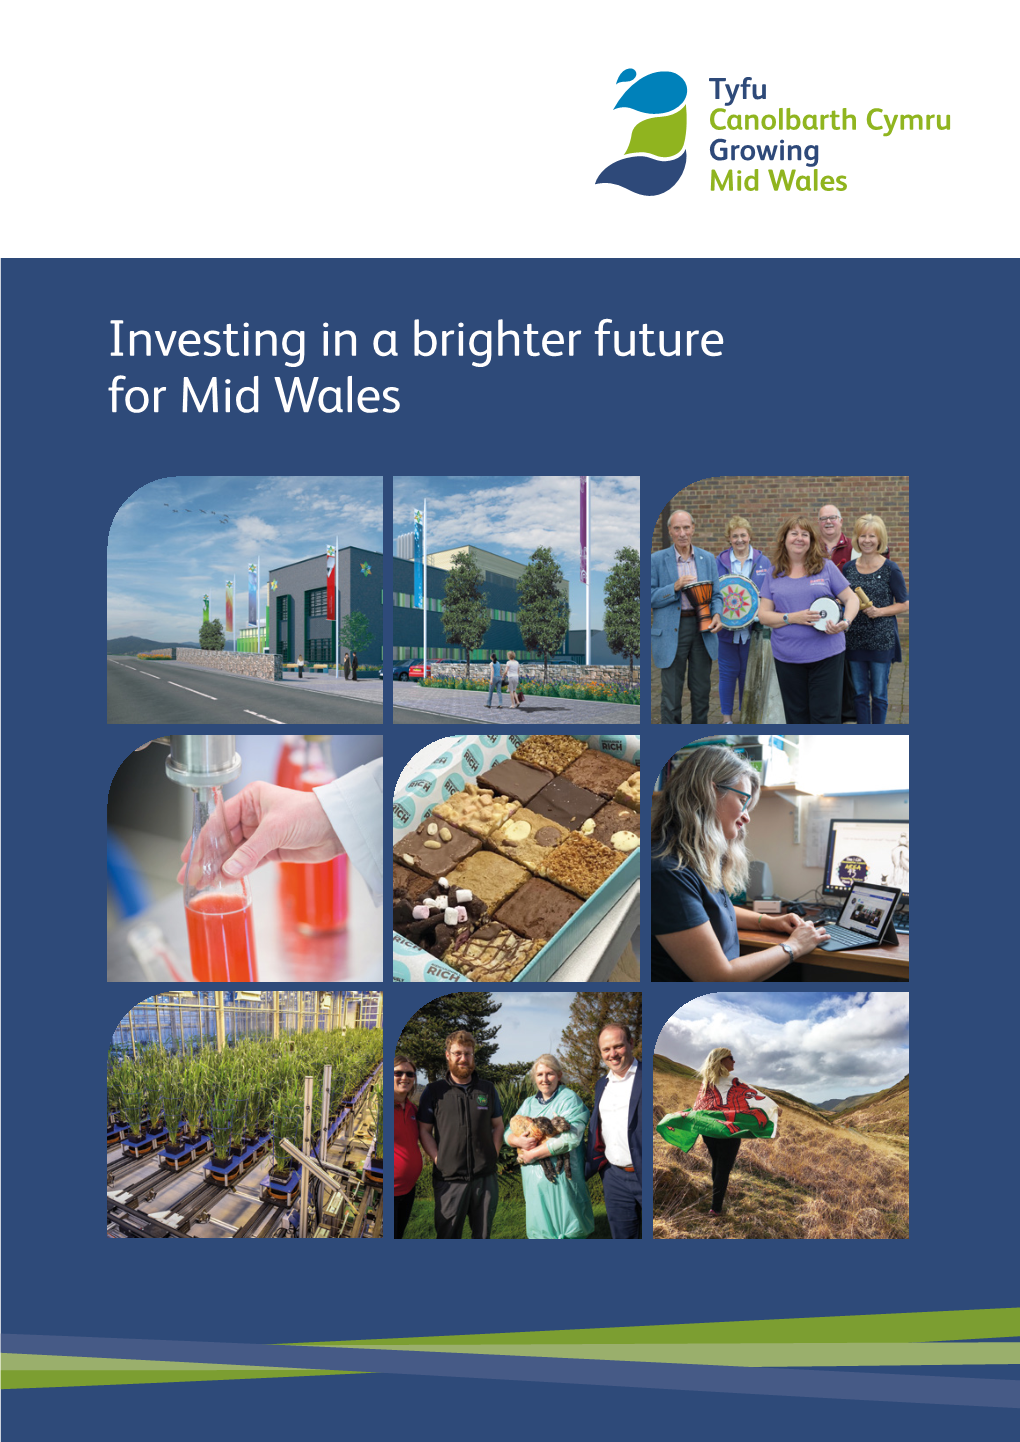 Investing in a Brighter Future for Mid Wales Regional Investment Helping Mid Wales Build a Brighter Future